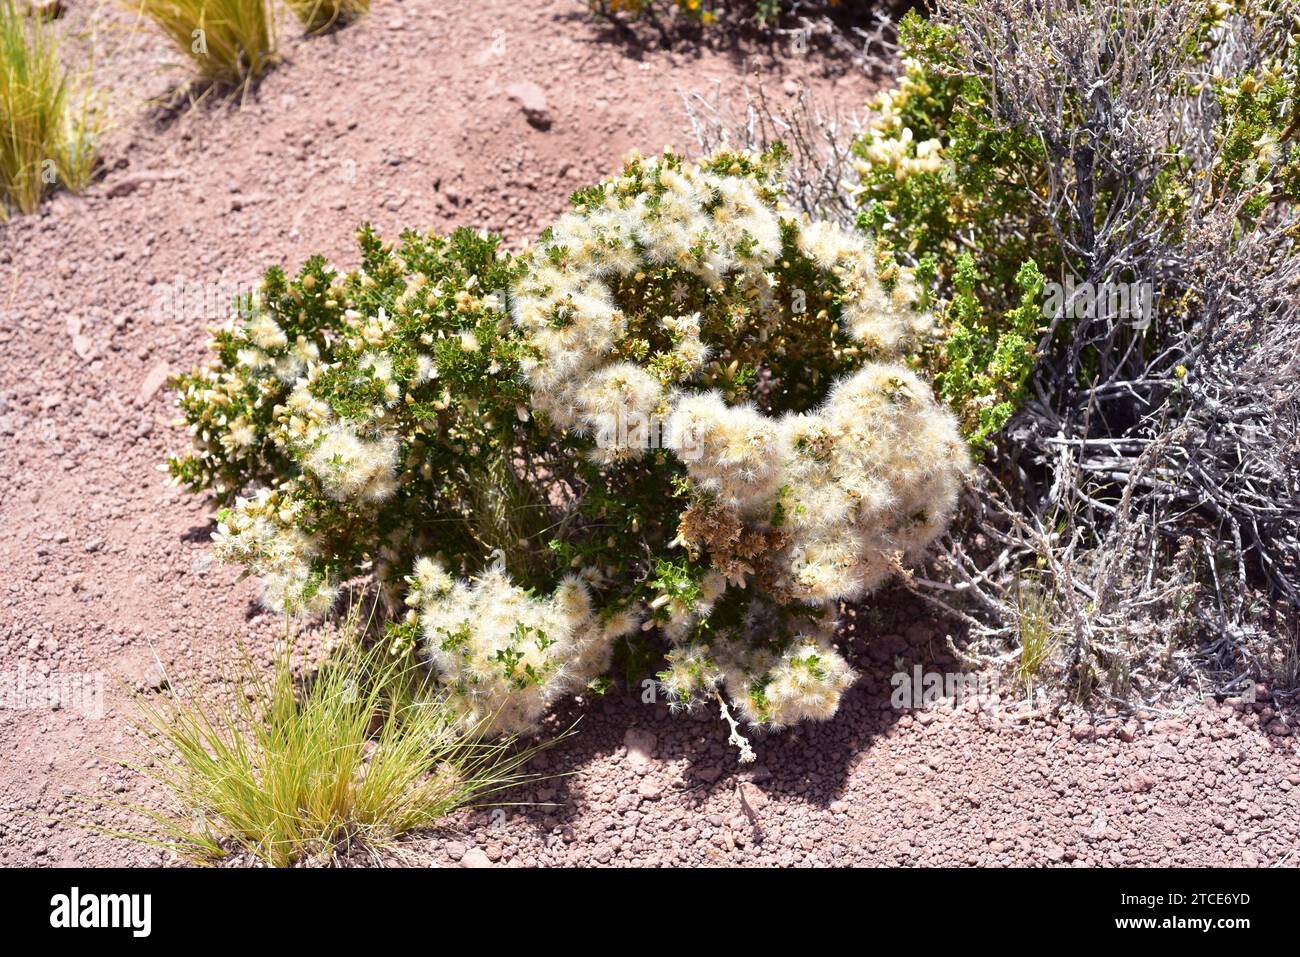 Tolita, tola lejia or chachacoma de burro (Baccharis tola) is a medicinal shrub native to northern Chile and Argentina. This photo was taken in Atacam Stock Photo